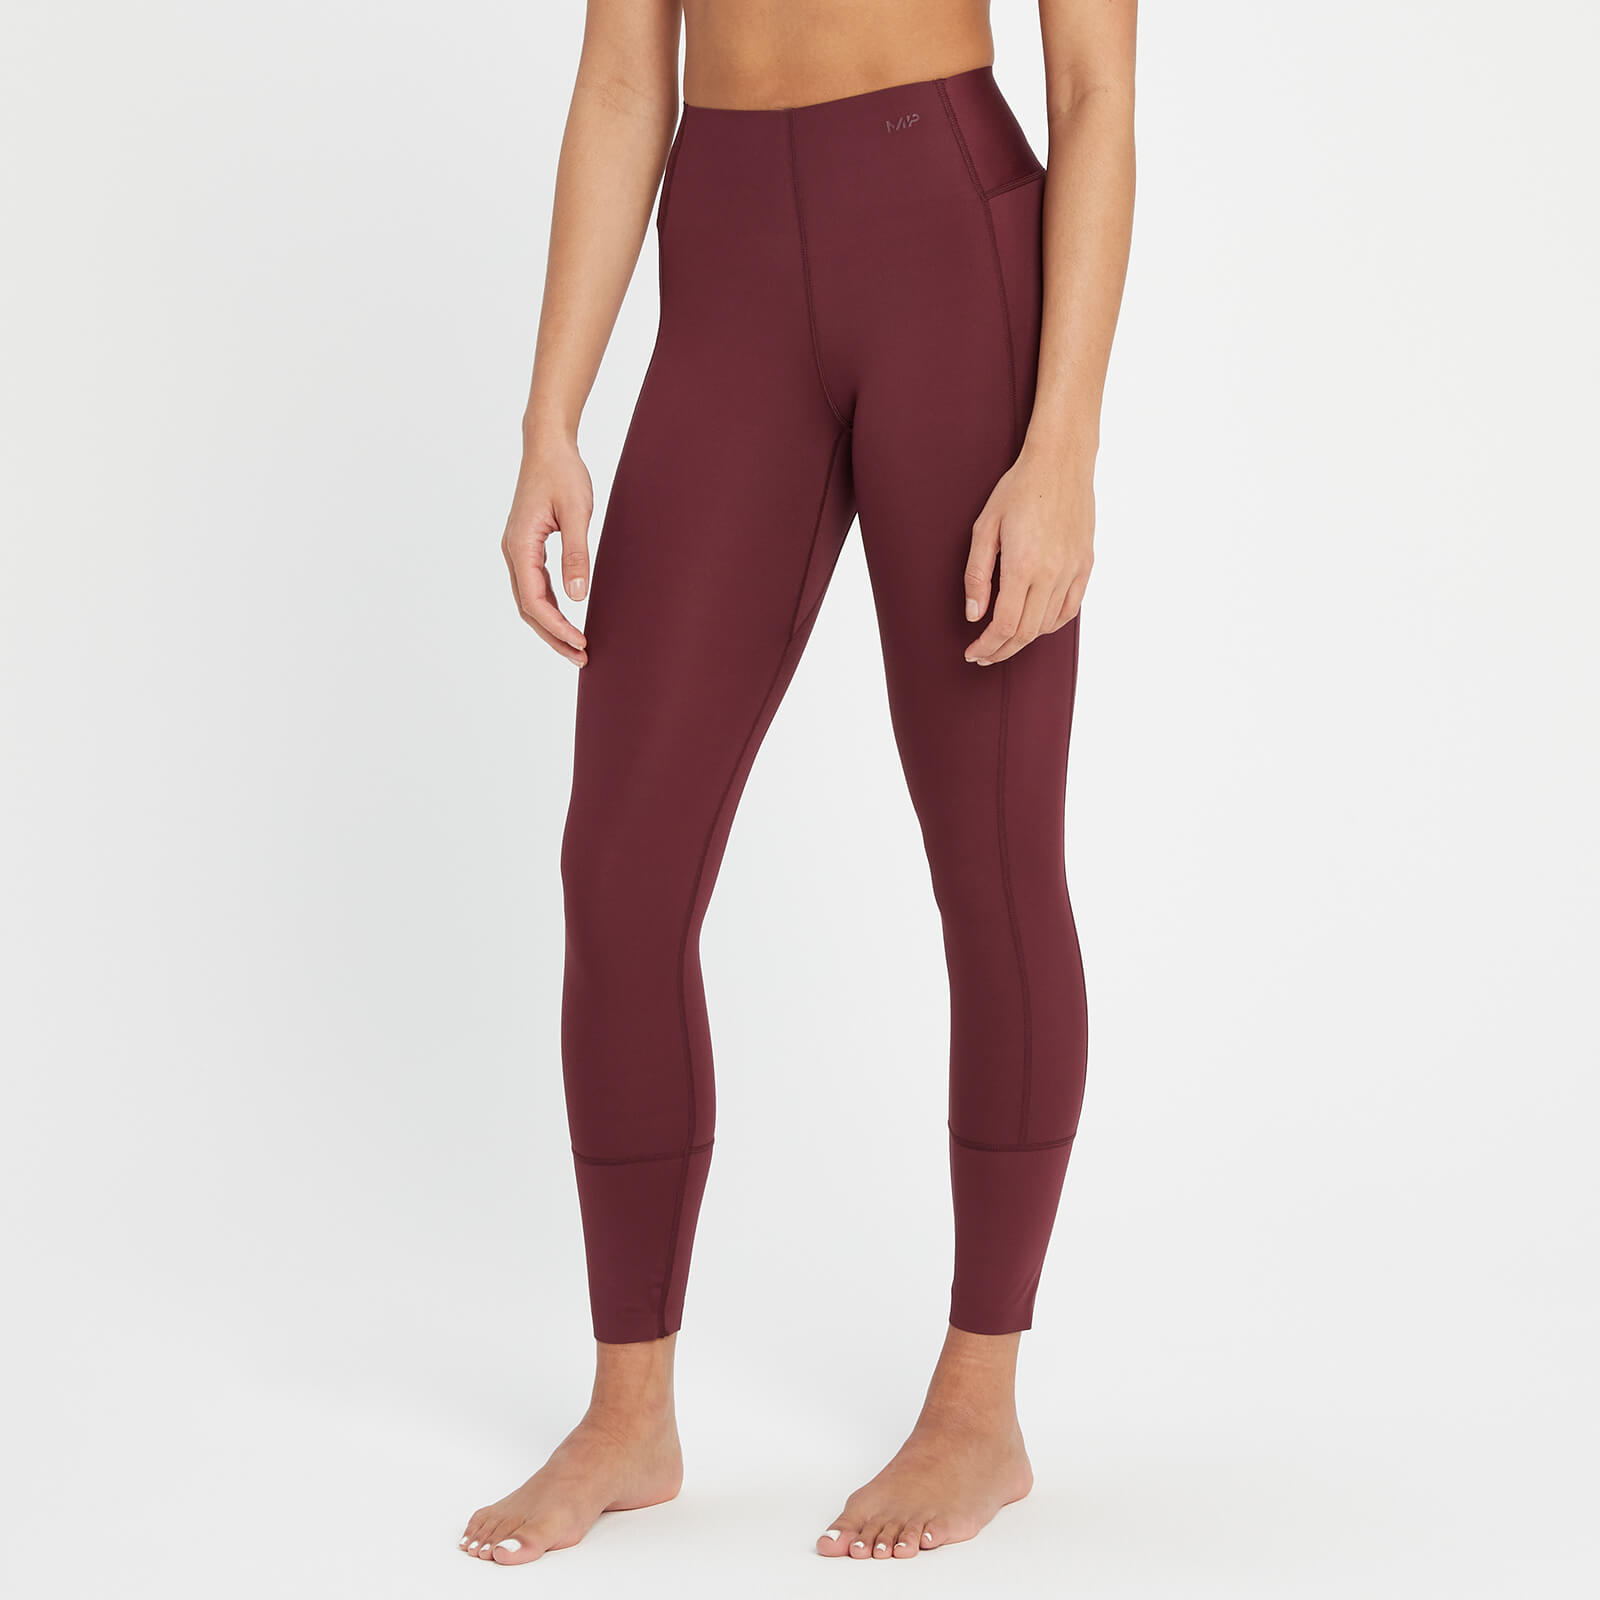 MP Women's Composure Repreve(r) Leggings - Washed Oxblood